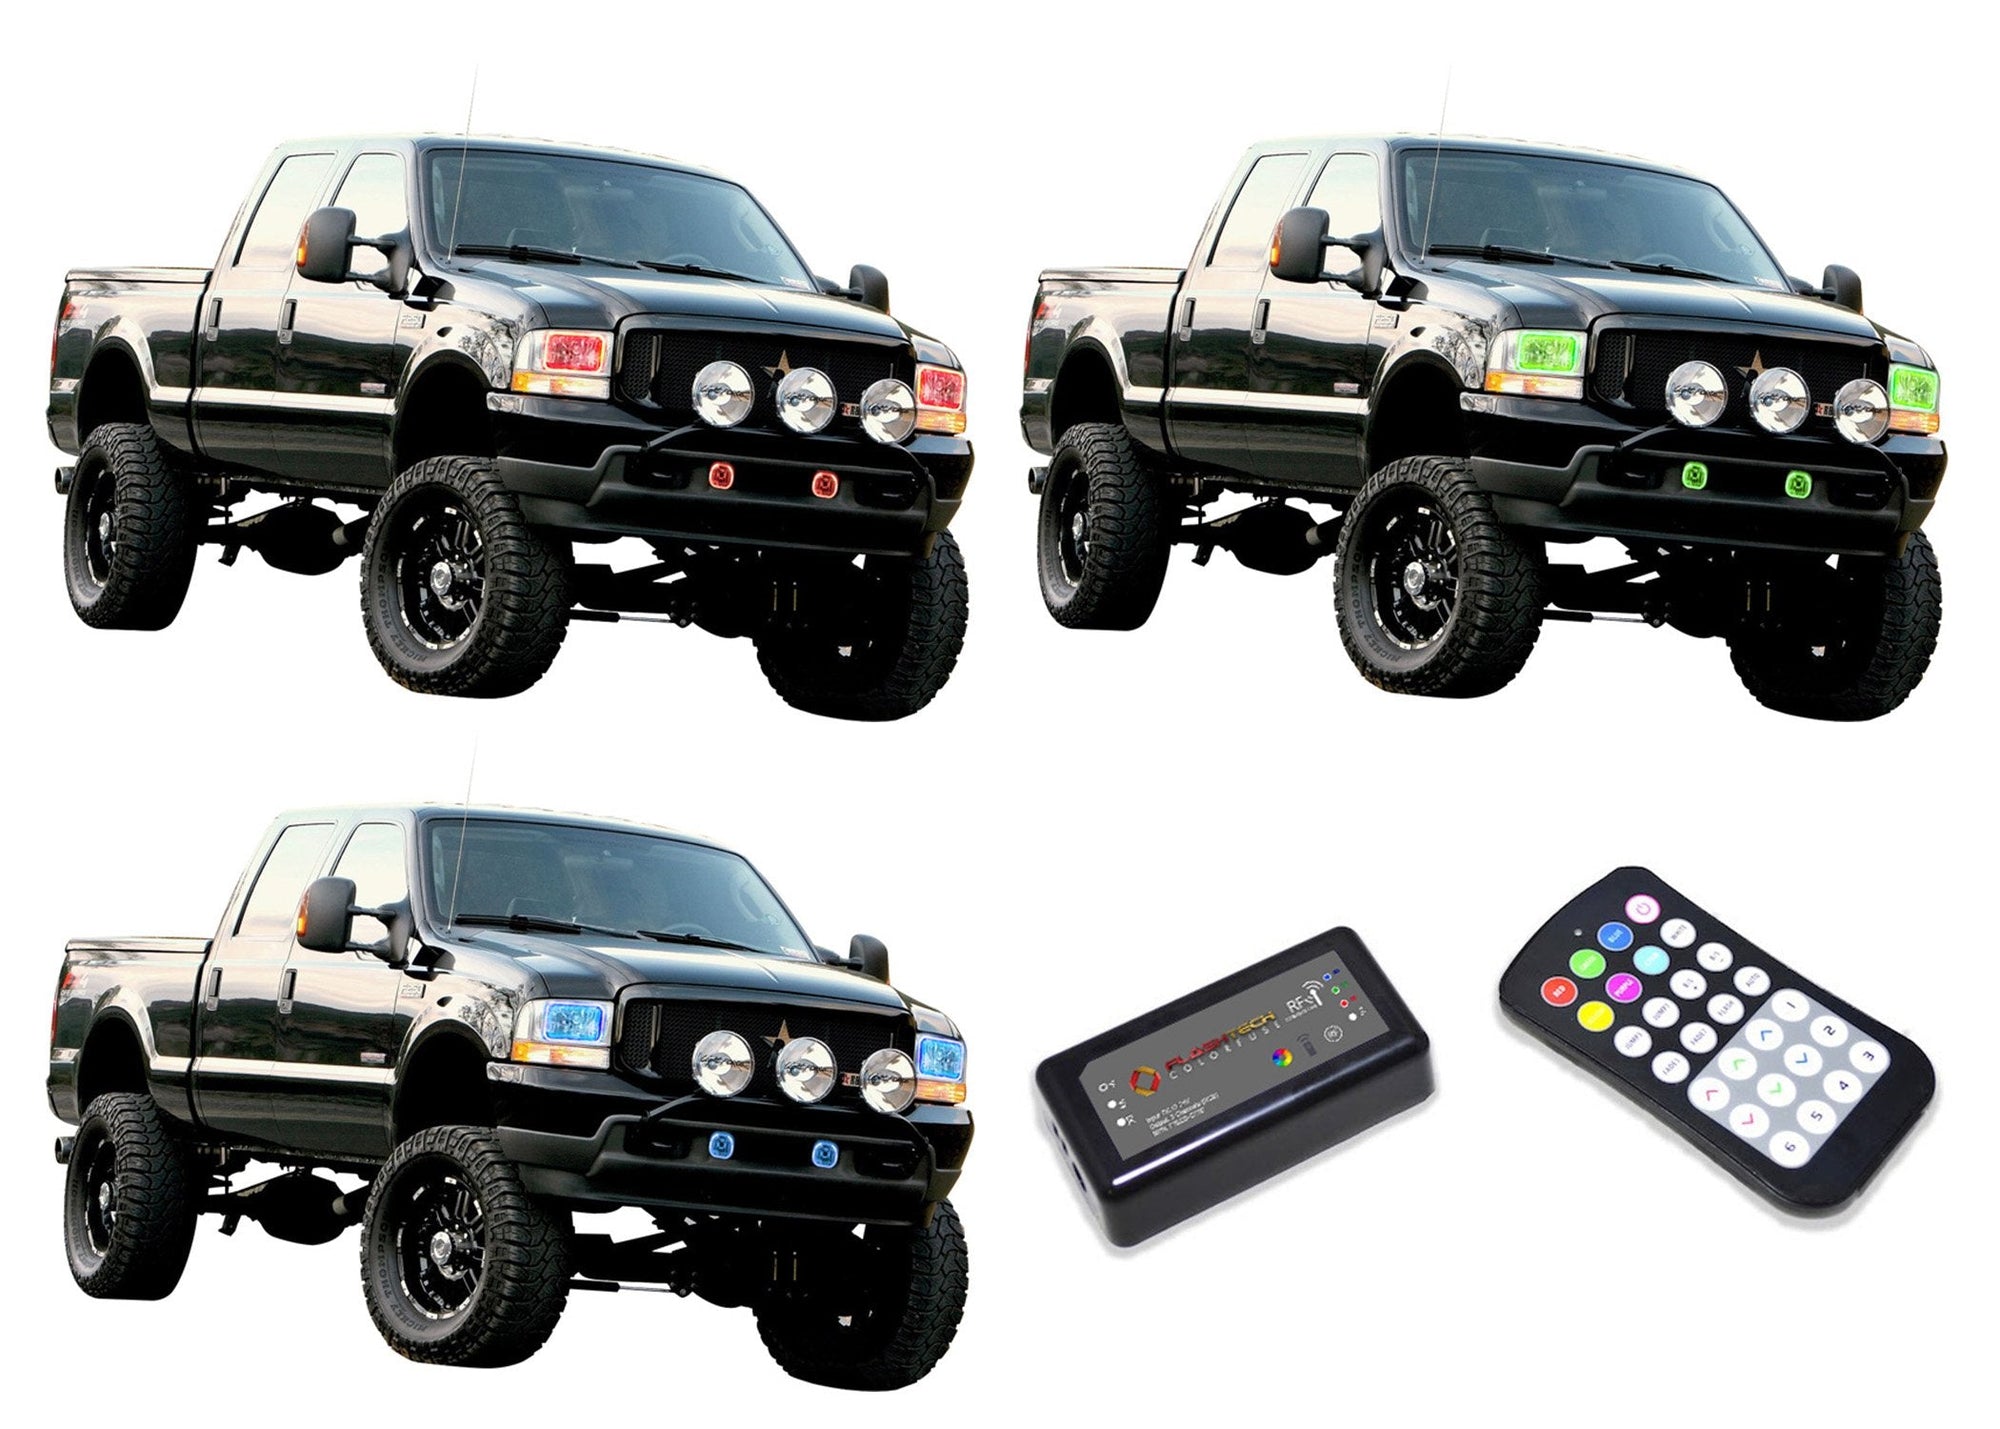 Ford-F-250 Super Duty-2001, 2002, 2003, 2004-LED-Halo-Headlights and Fog Lights-RGB-Colorfuse RF Remote-FO-F20104-V3HFCFRF